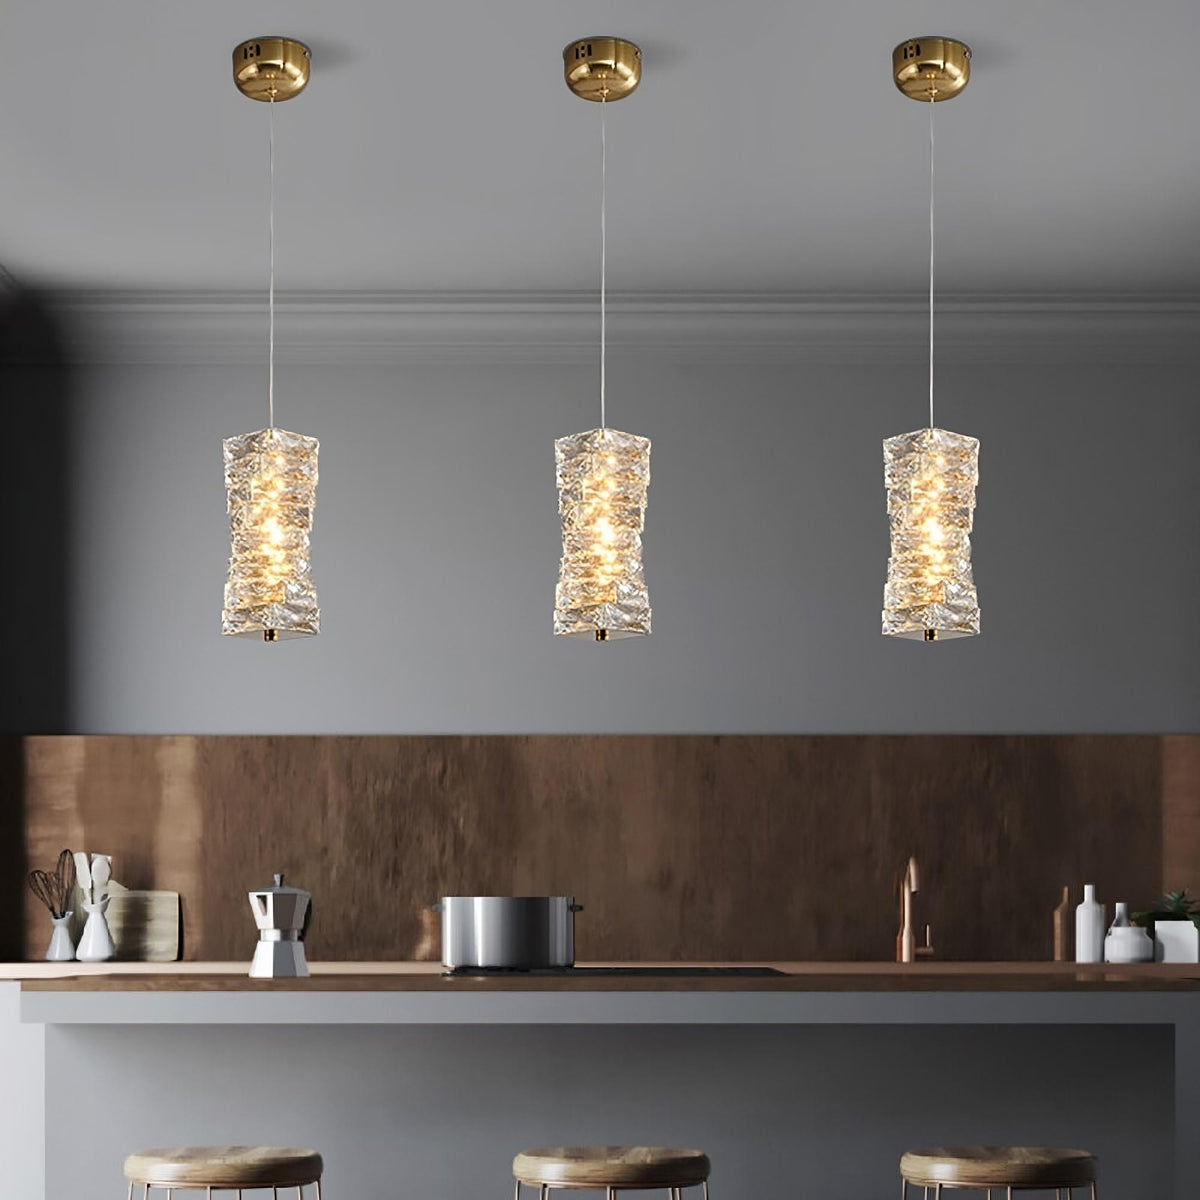 Three elegant Morsale.com Bacci Crystal pendant light fixtures with handmade crystal shades hang above a modern kitchen counter, casting a warm glow on neatly arranged kitchen accessories.